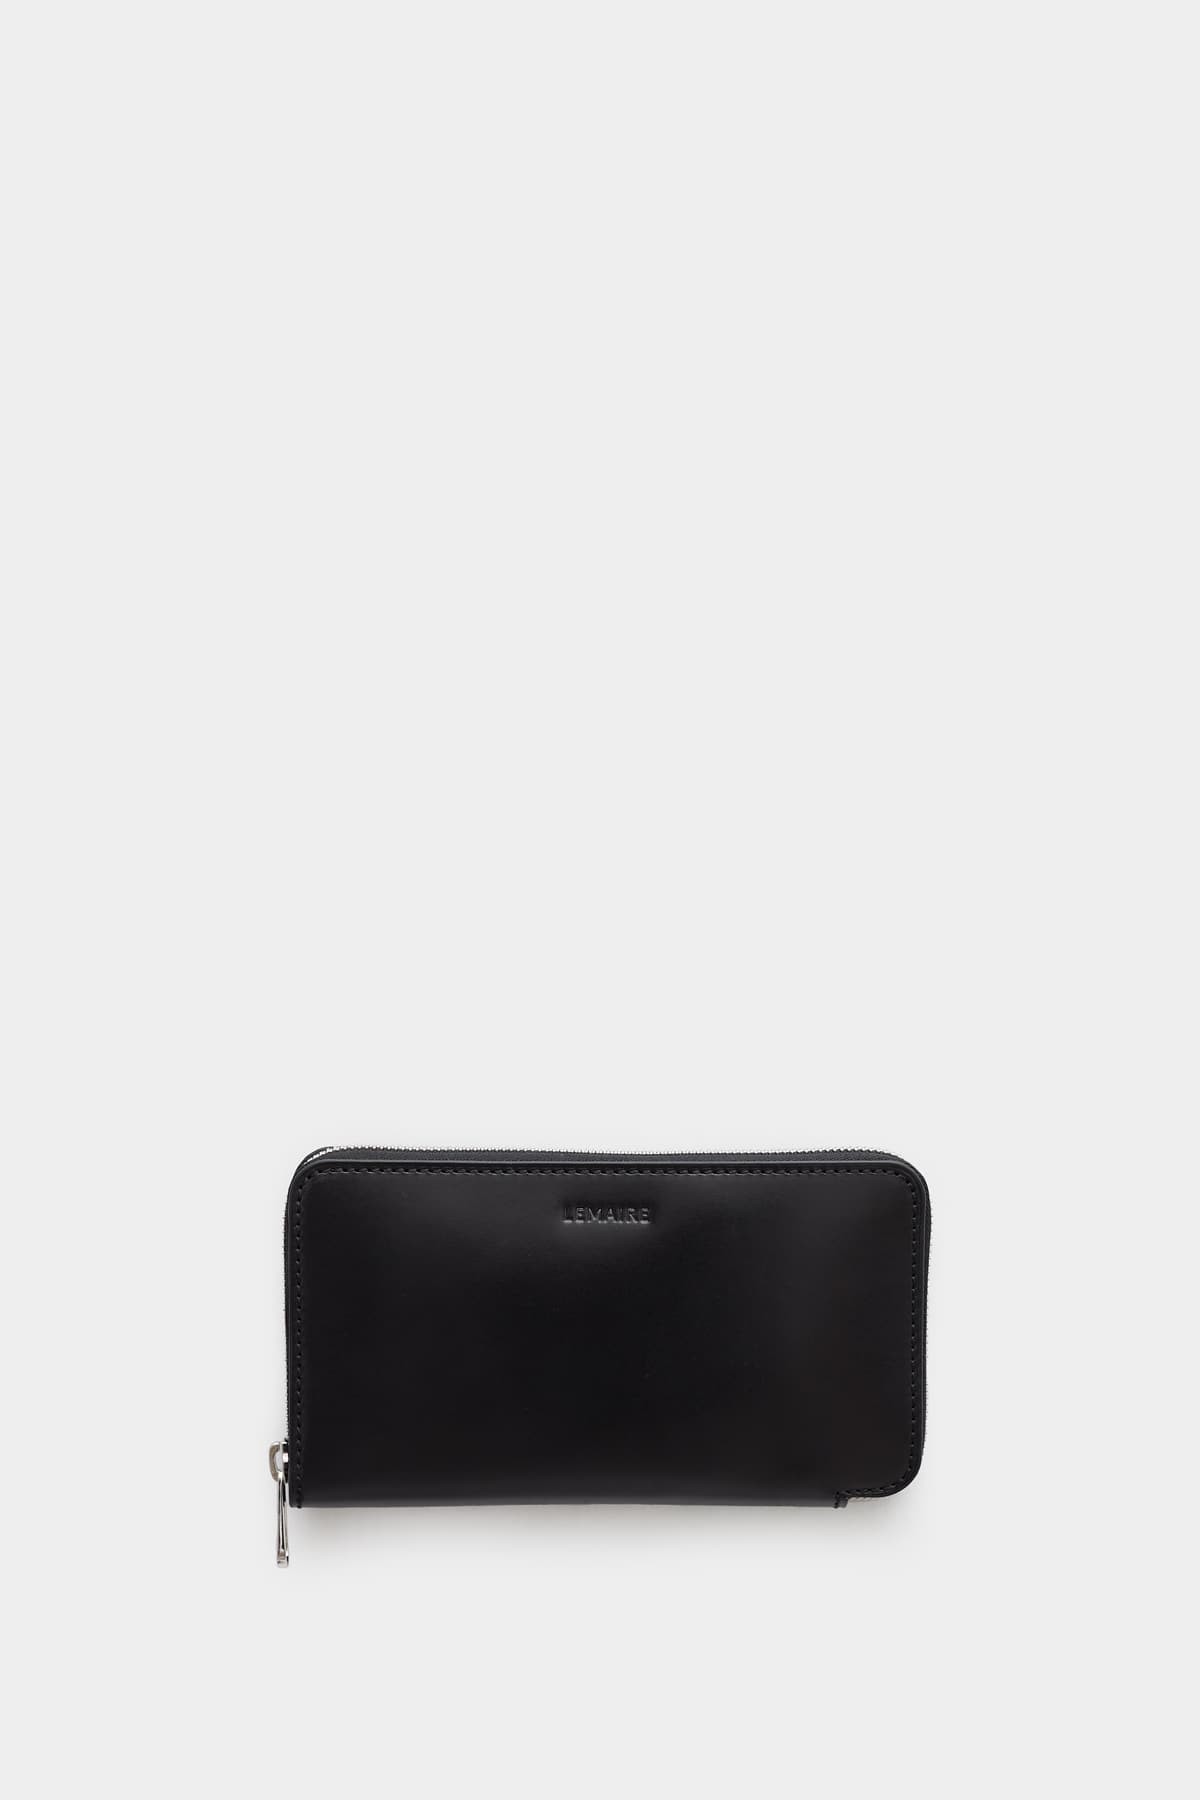 LEMAIRE BLACK CONTINENTAL WALLET ON STRAP IAMNUE